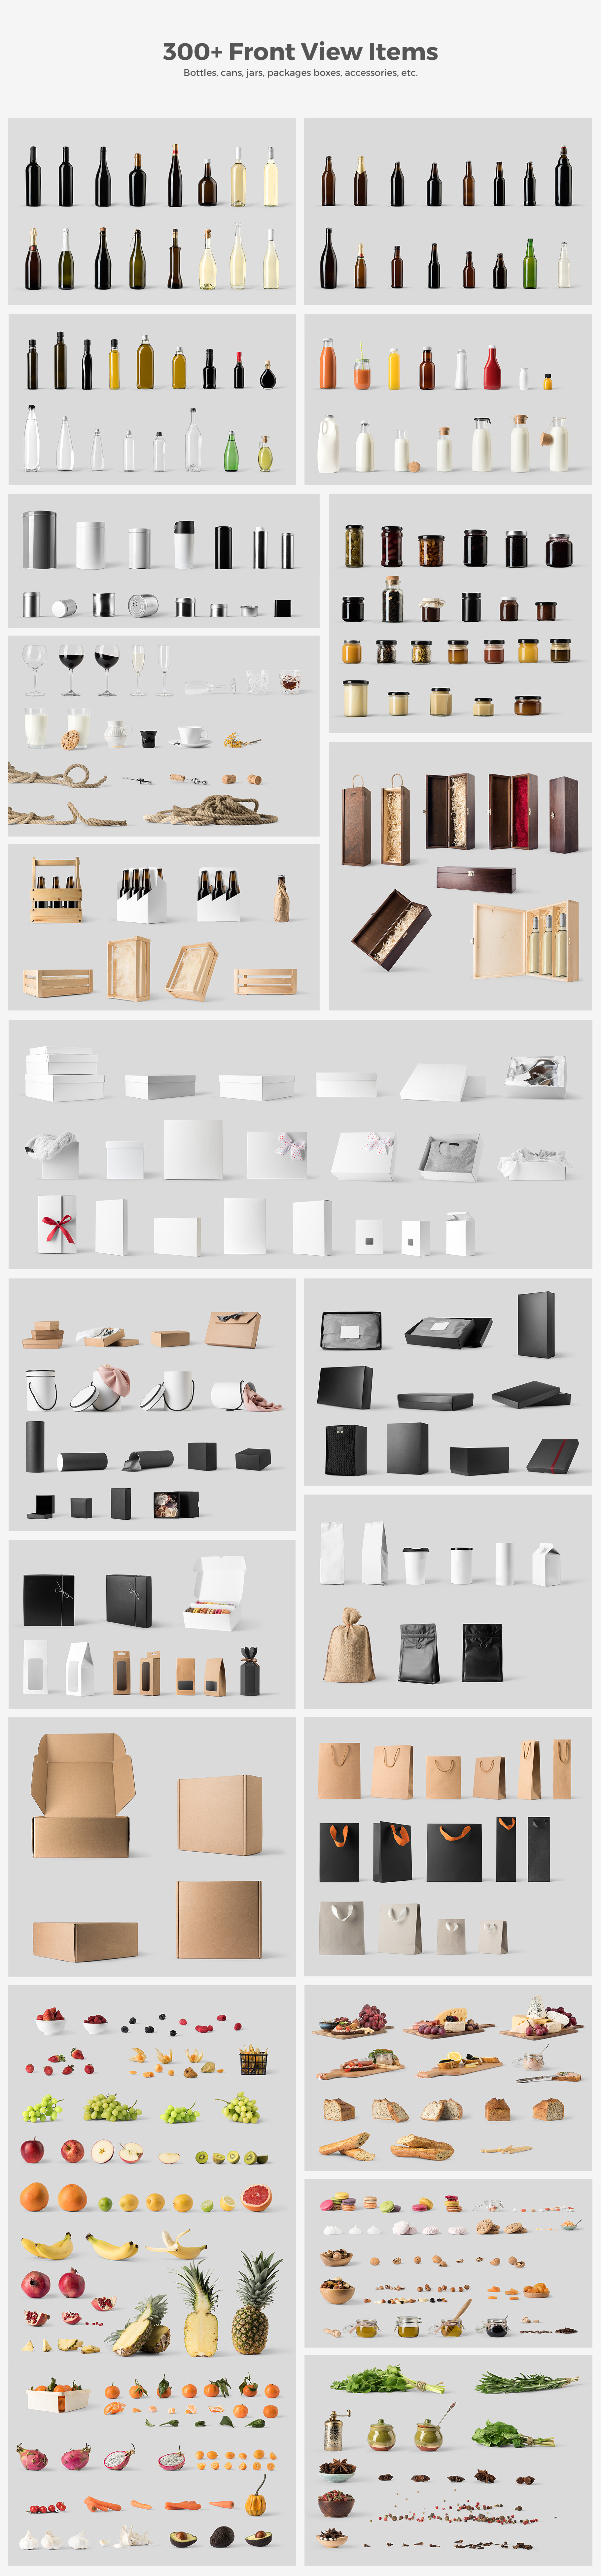 Packaging Mockup Collection by Mockup Cloud on Dribbble